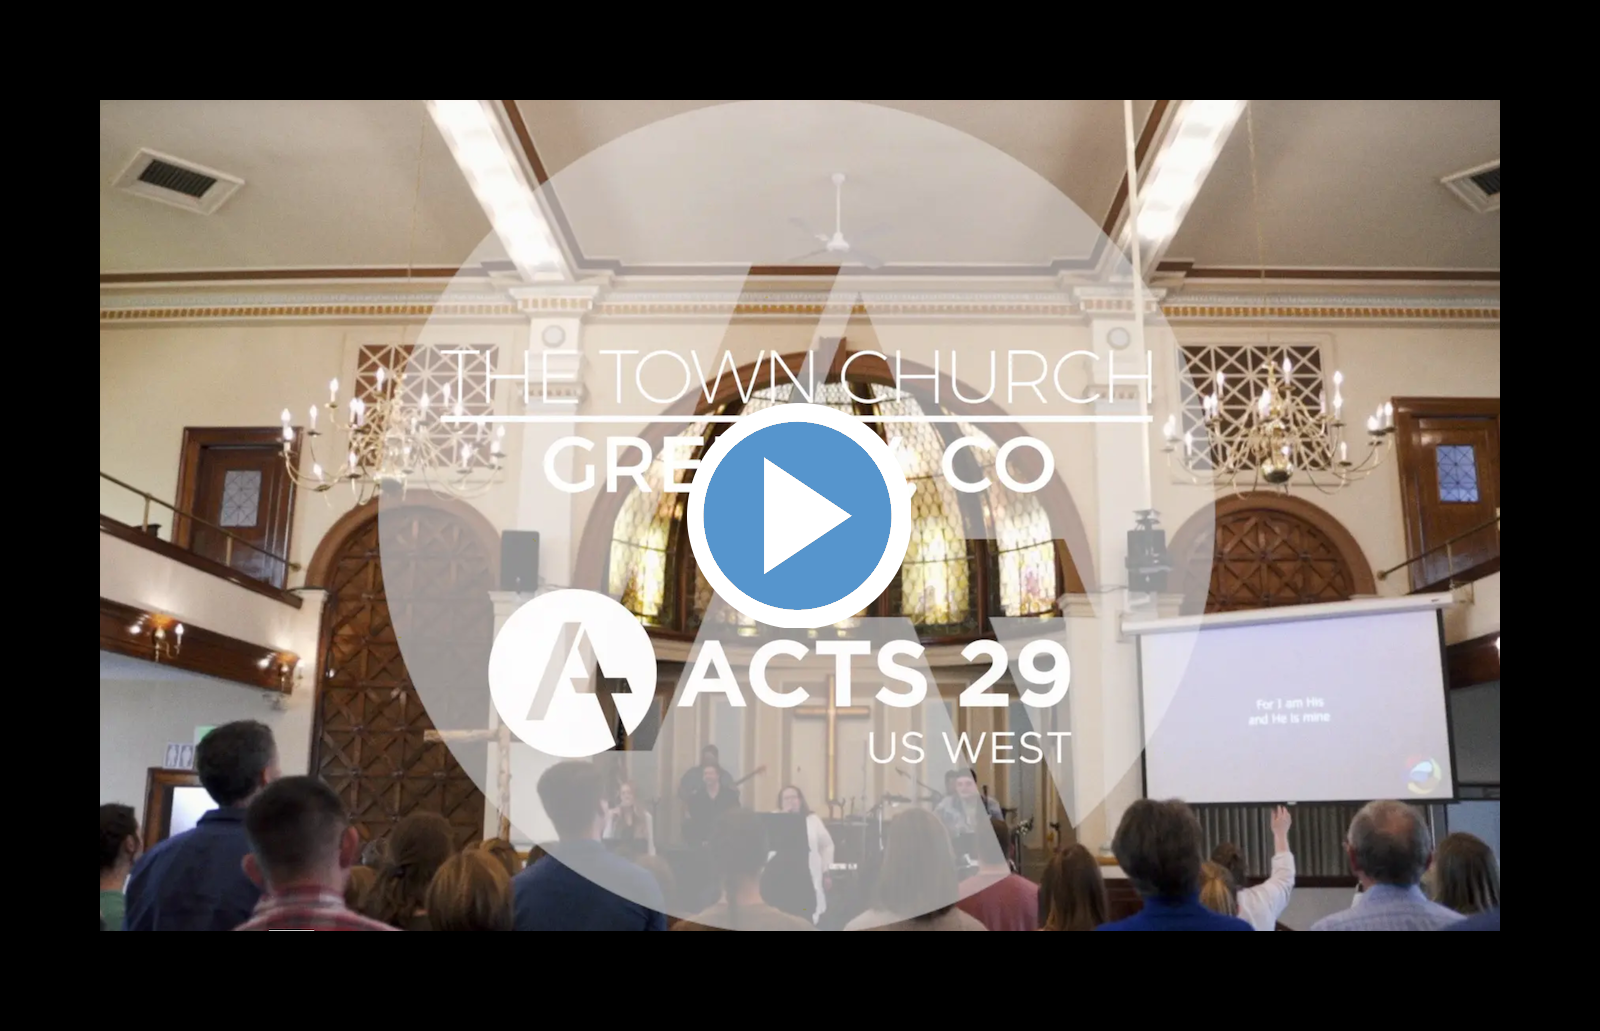 Video: The Town Church Greeley